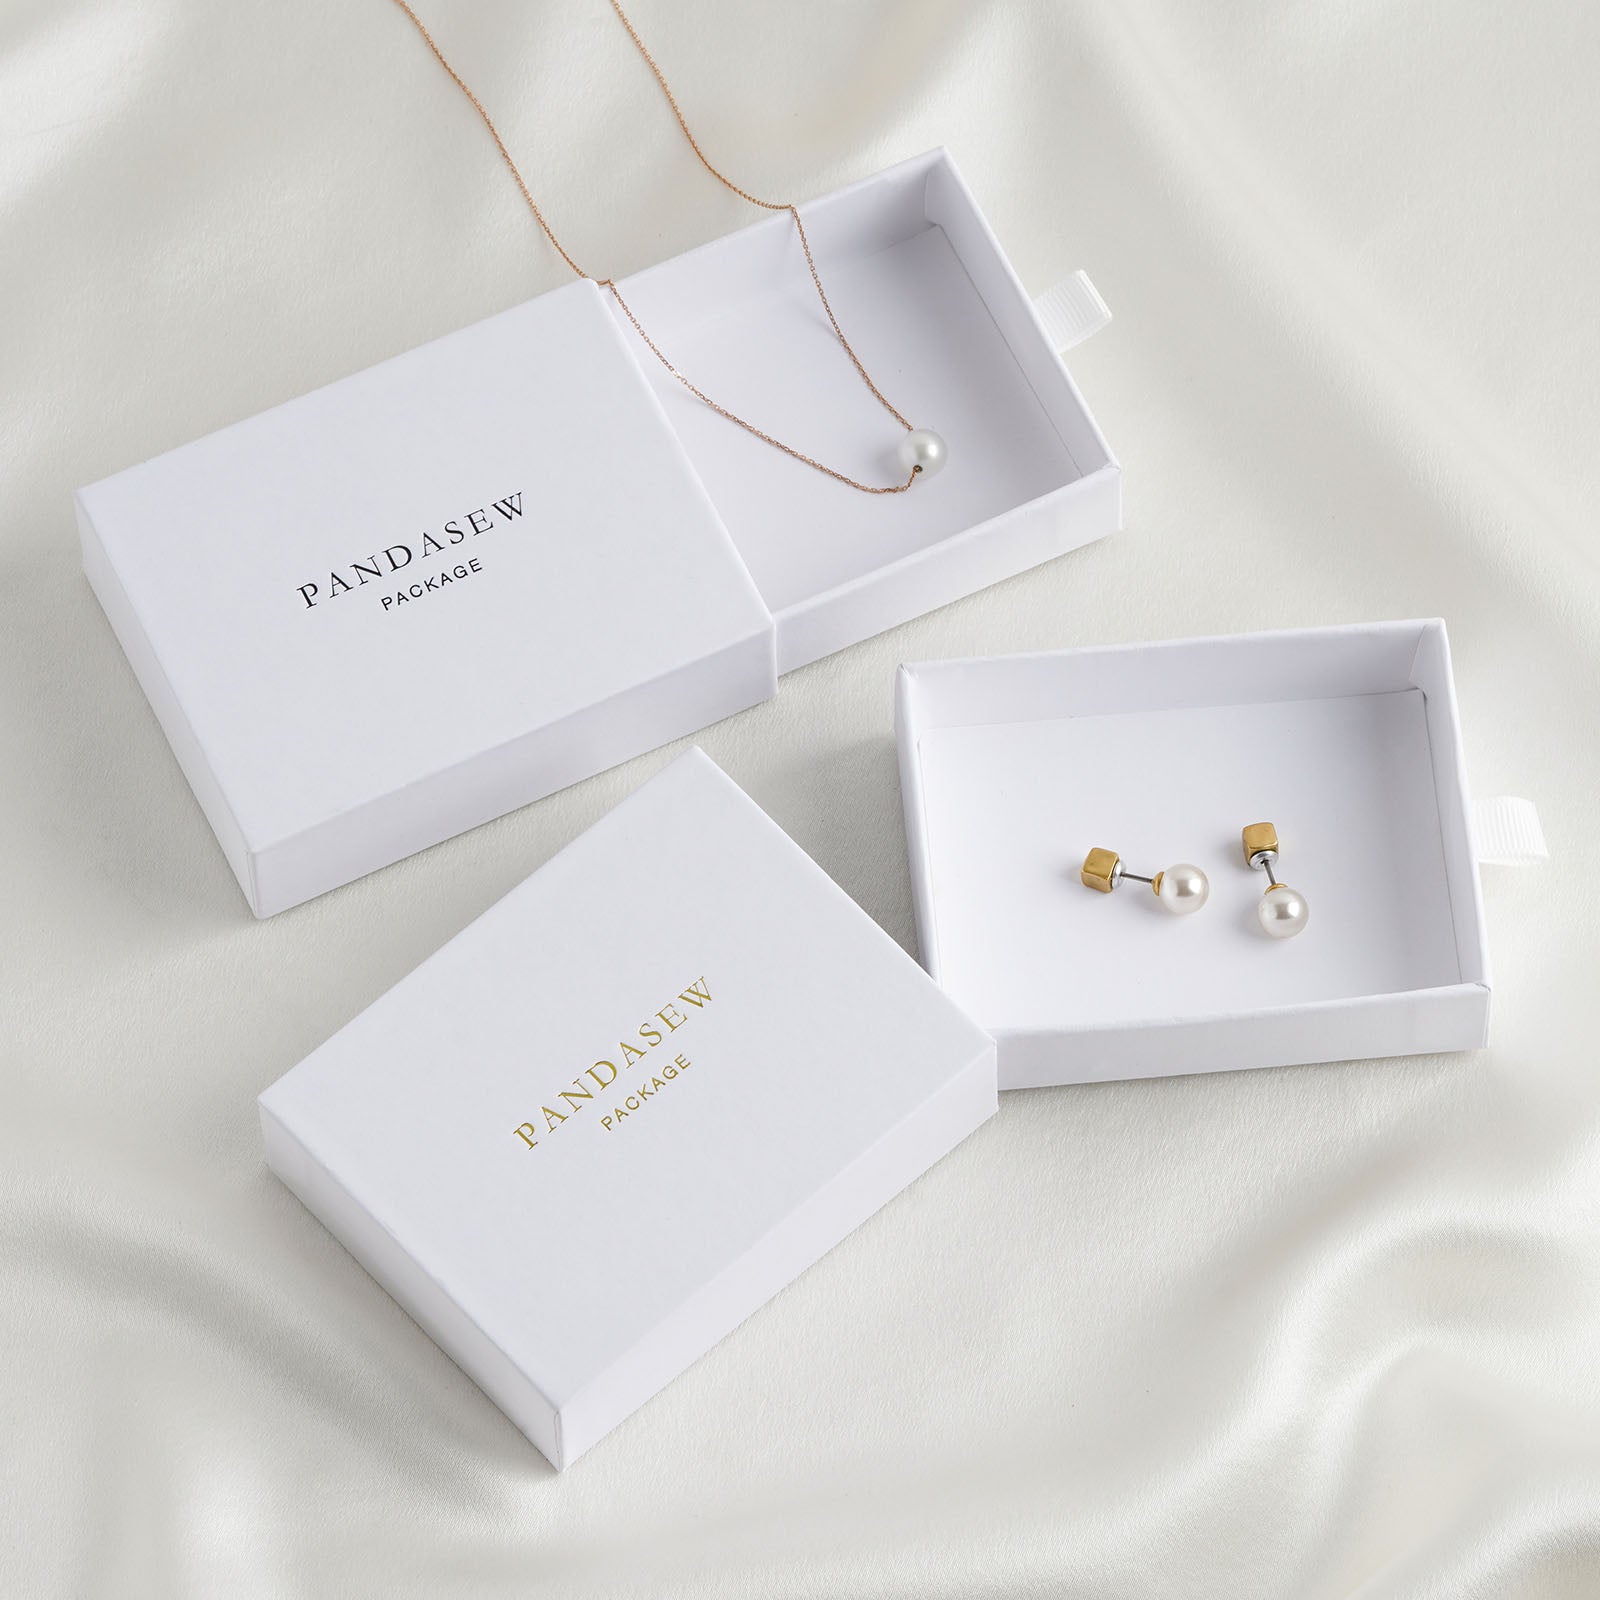 jewelry packaging for small business